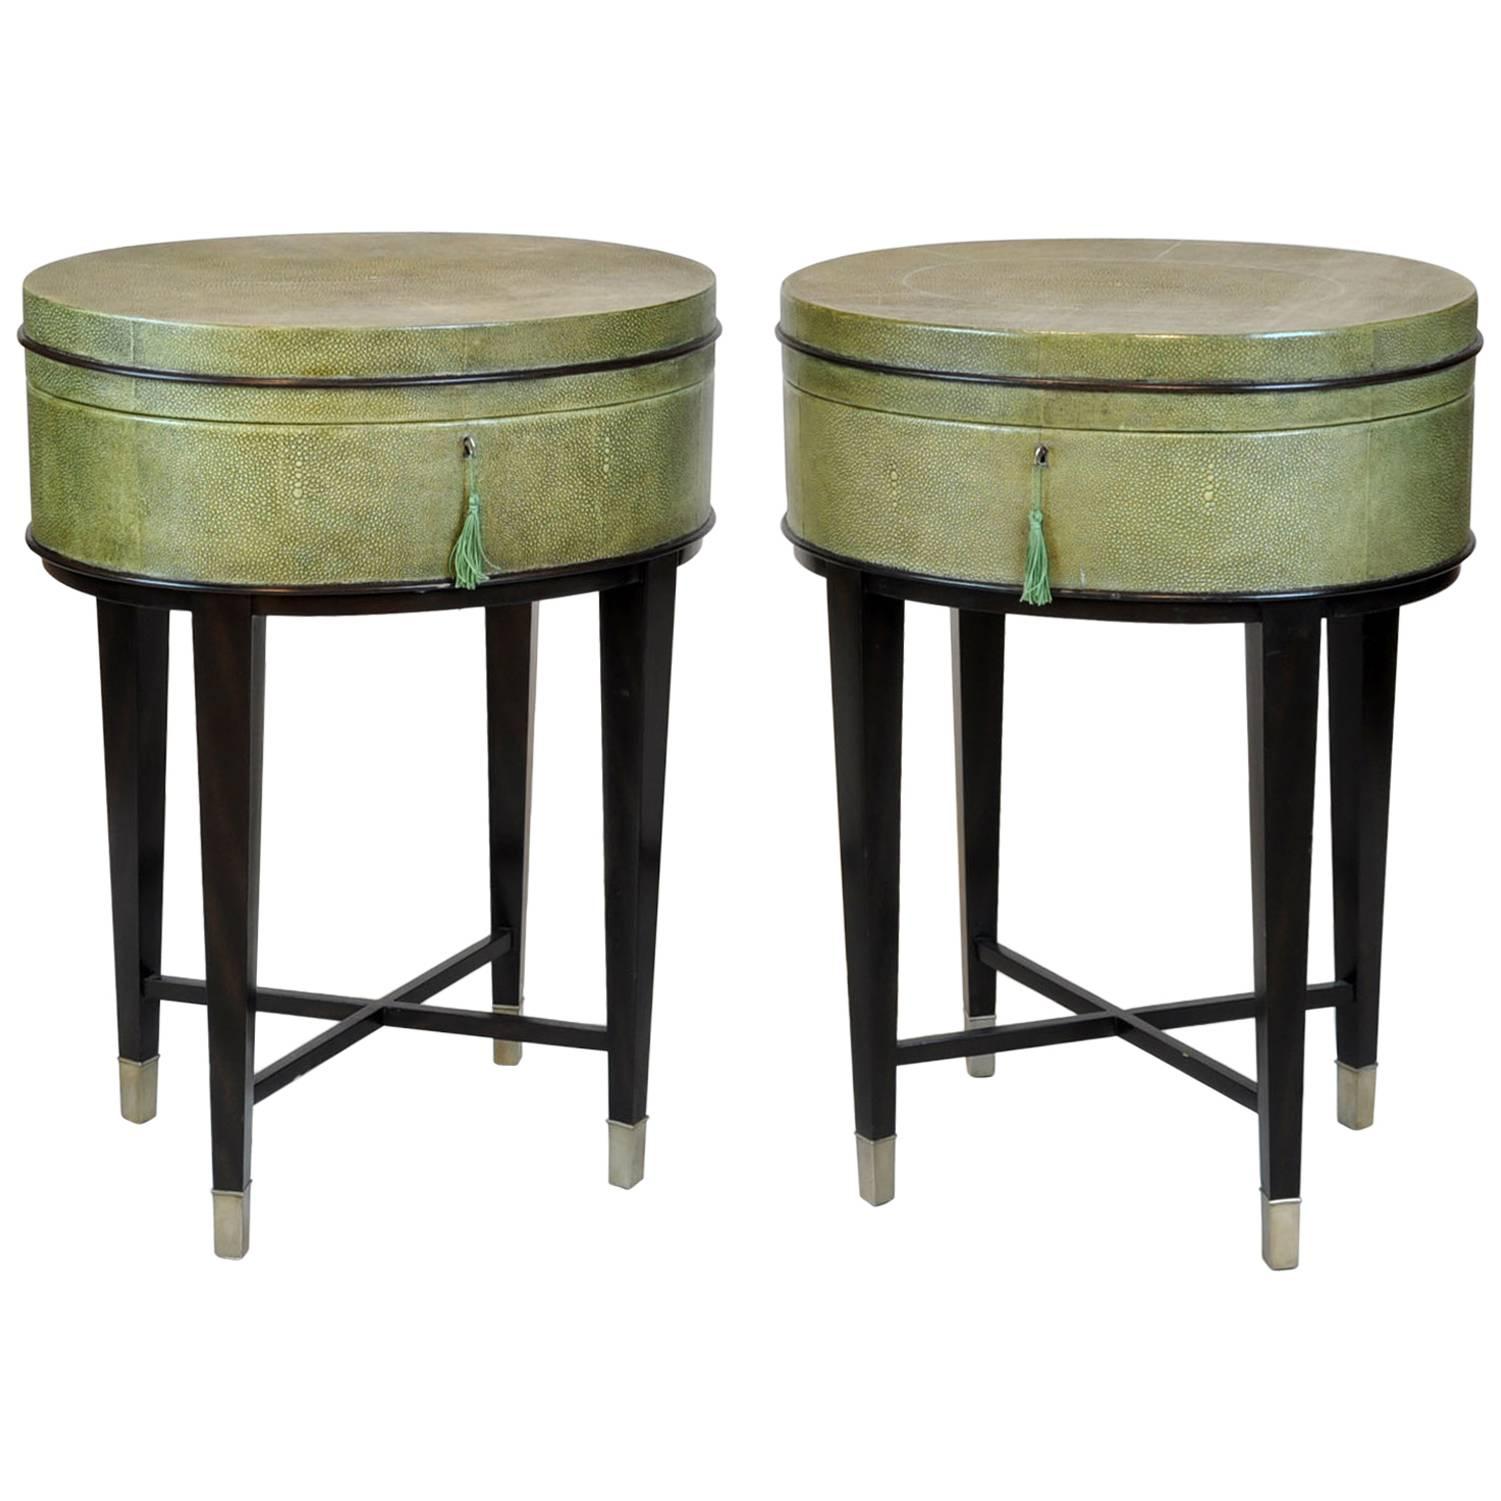 Pair of Oval Shagreen Side Tables or Stands on Ebonized Bases